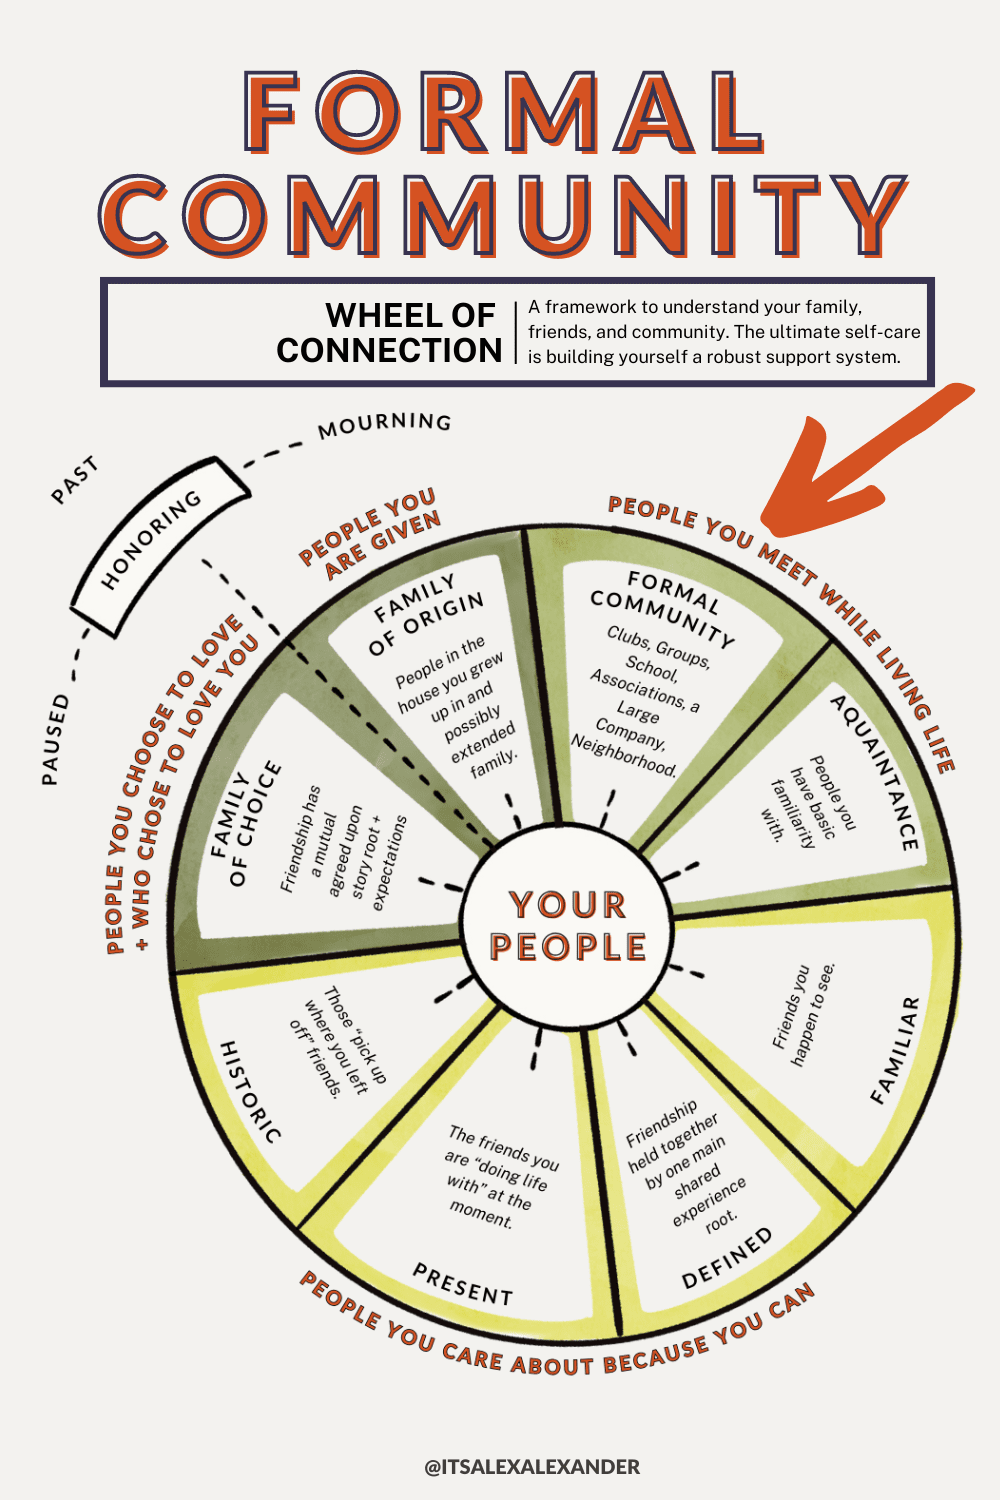 Formal Community - Wheel of Connection - FA framework to understand your family, friends, and community. The ultimate self-care is building yourself a robust support system.